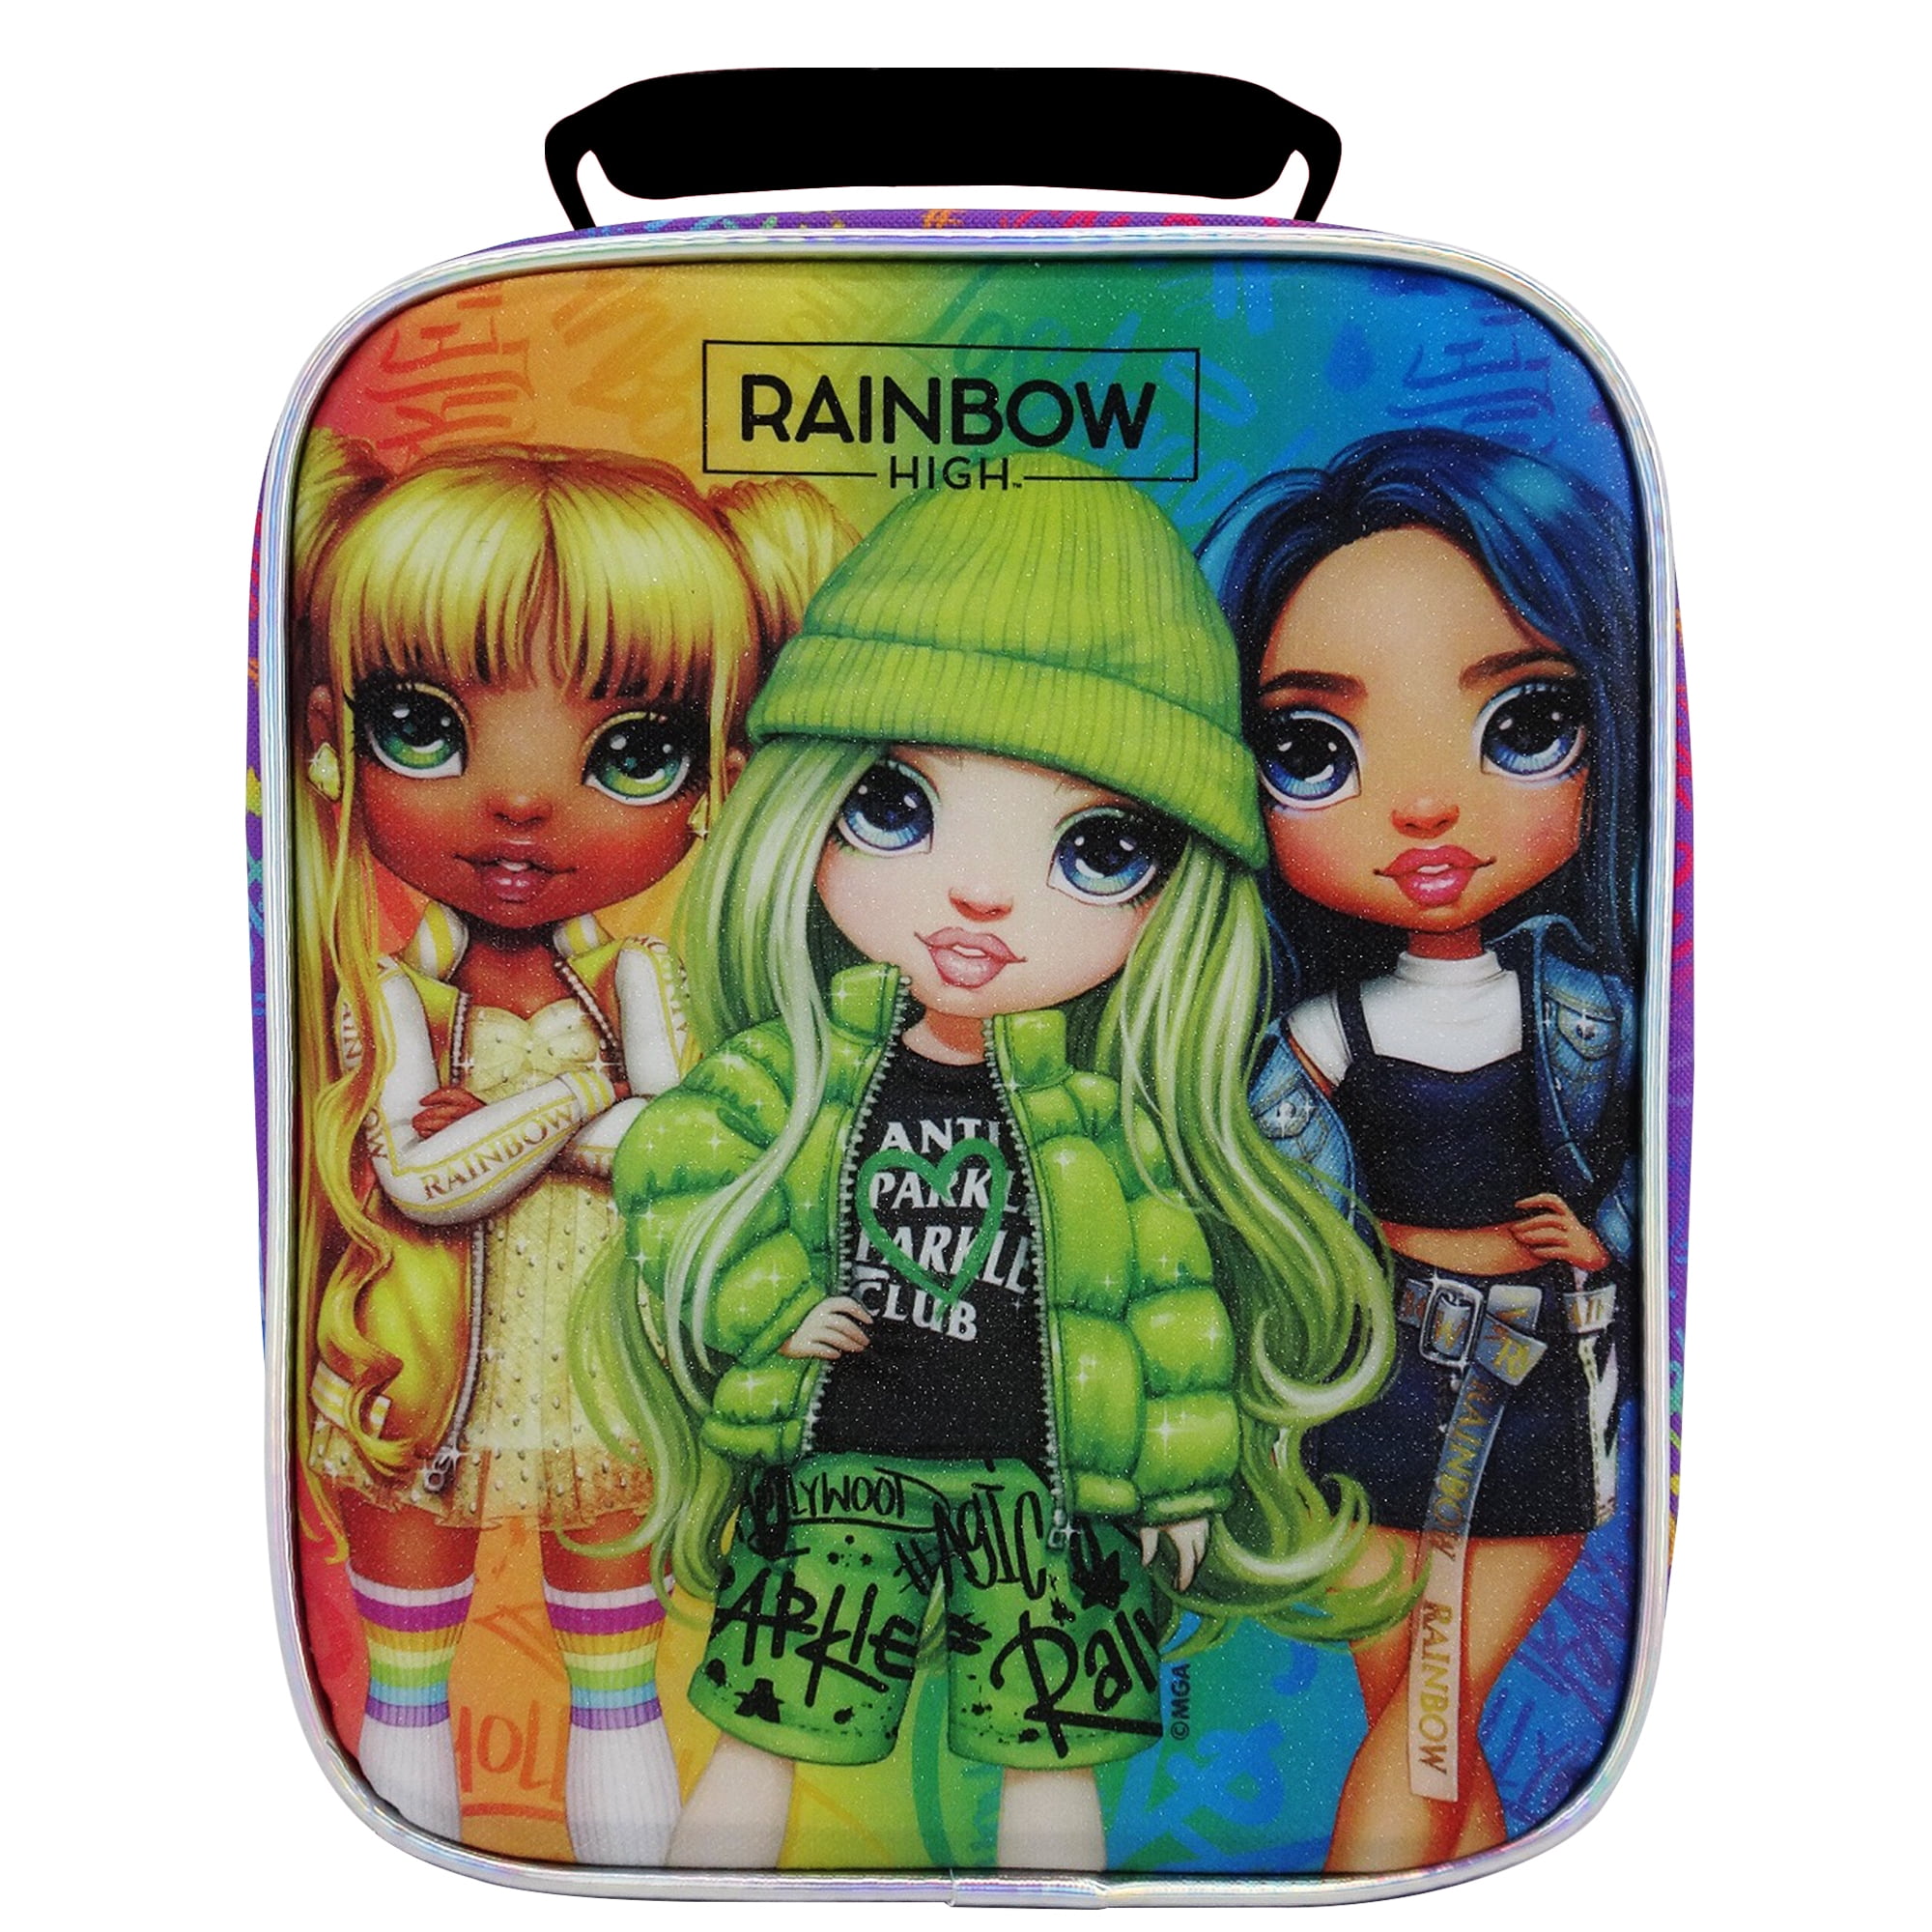 UOYHXQ Rainbow Insulated Lunch Box for Girls, 12.4 x 10 x 2